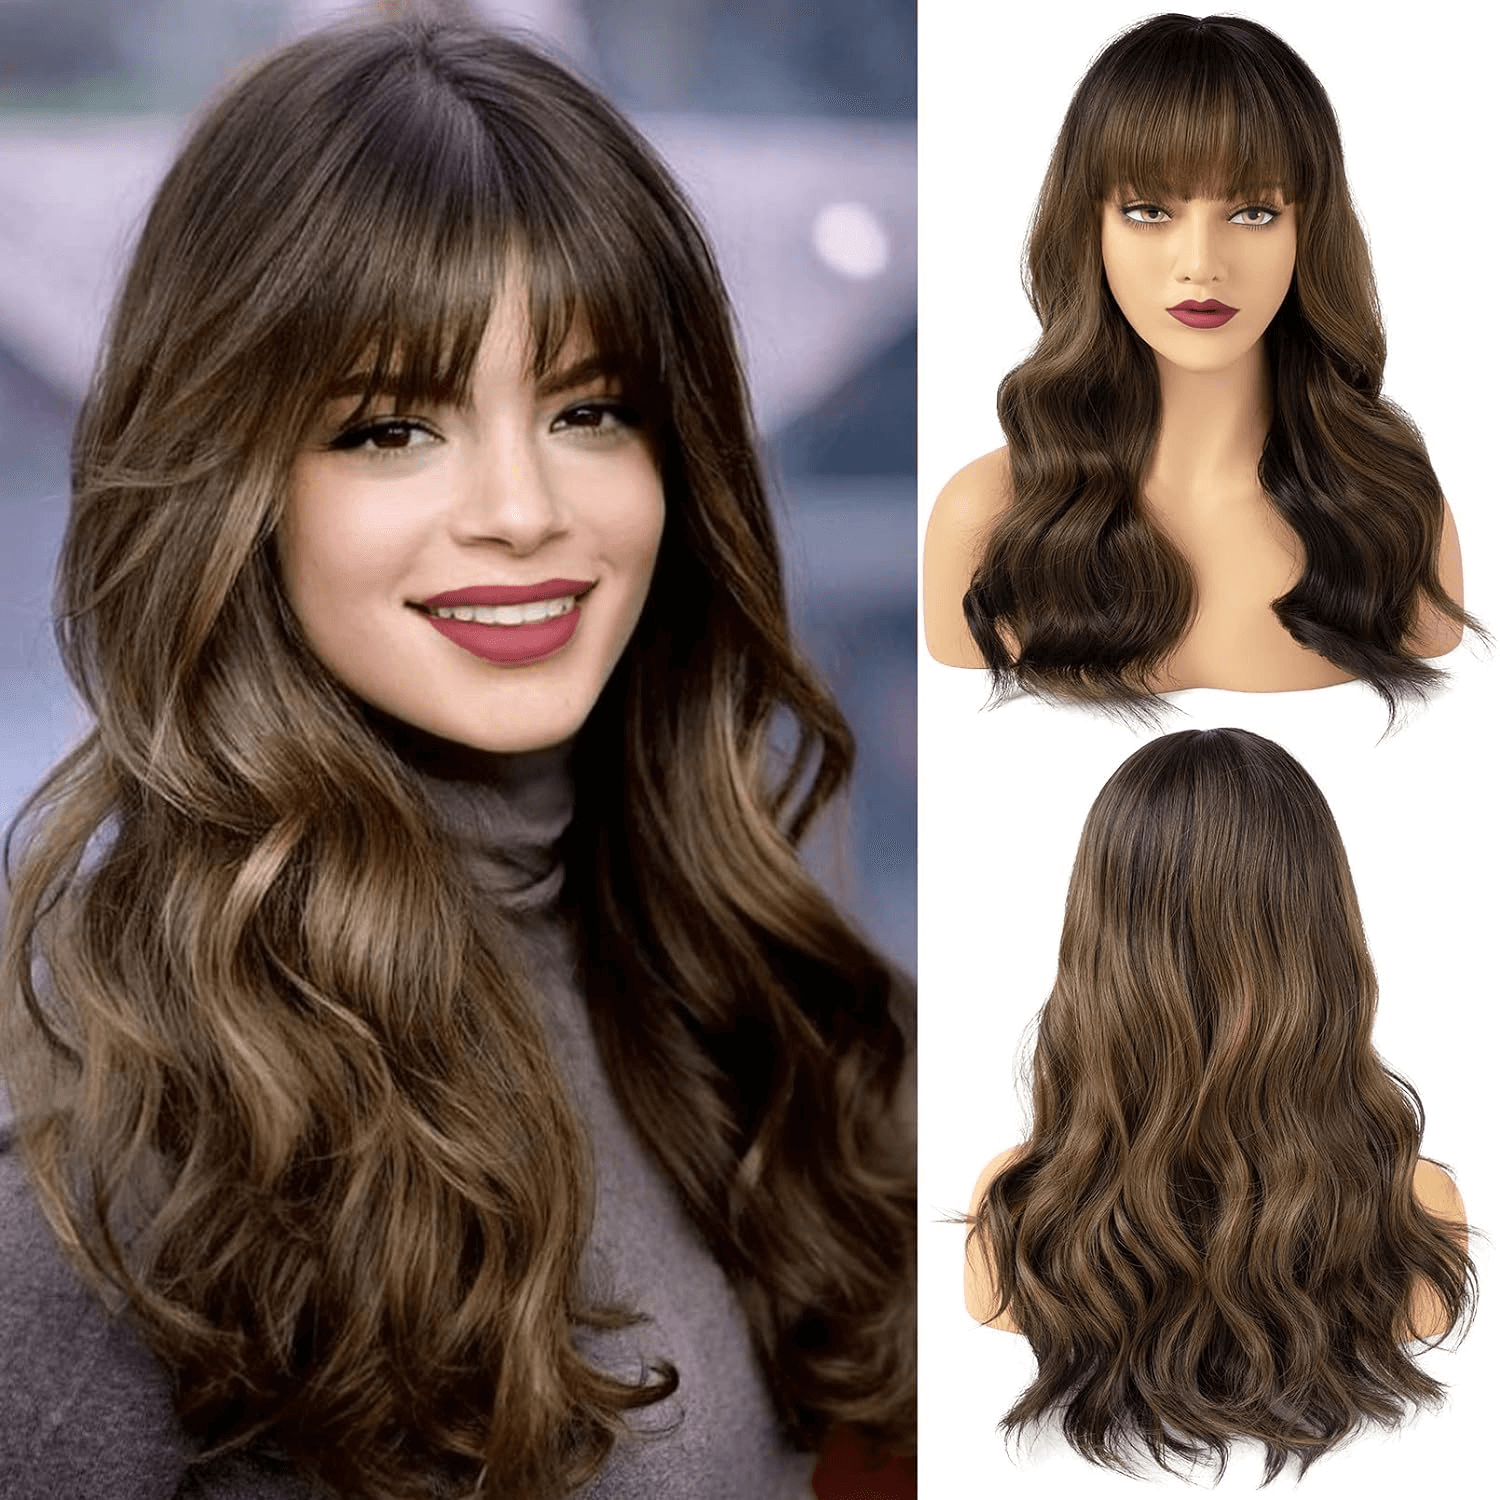 Long Wavy Blonde Wig with Curtain Bangs for Women, Dark Brown Mixed Caramel Brown Synthetic Hair Piece for Daily Use Party